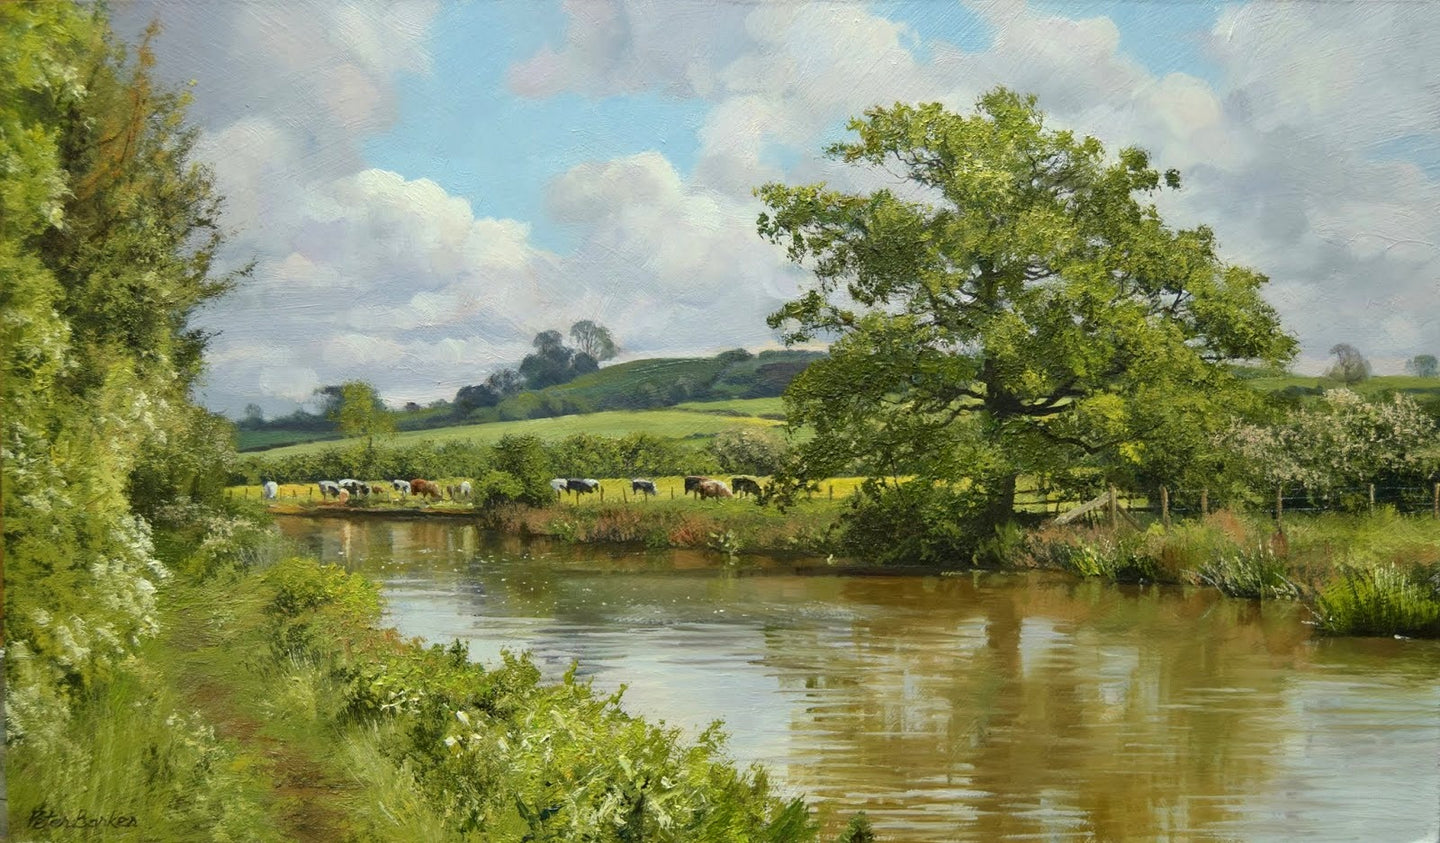 Cattle by the Canal, by Peter Barker